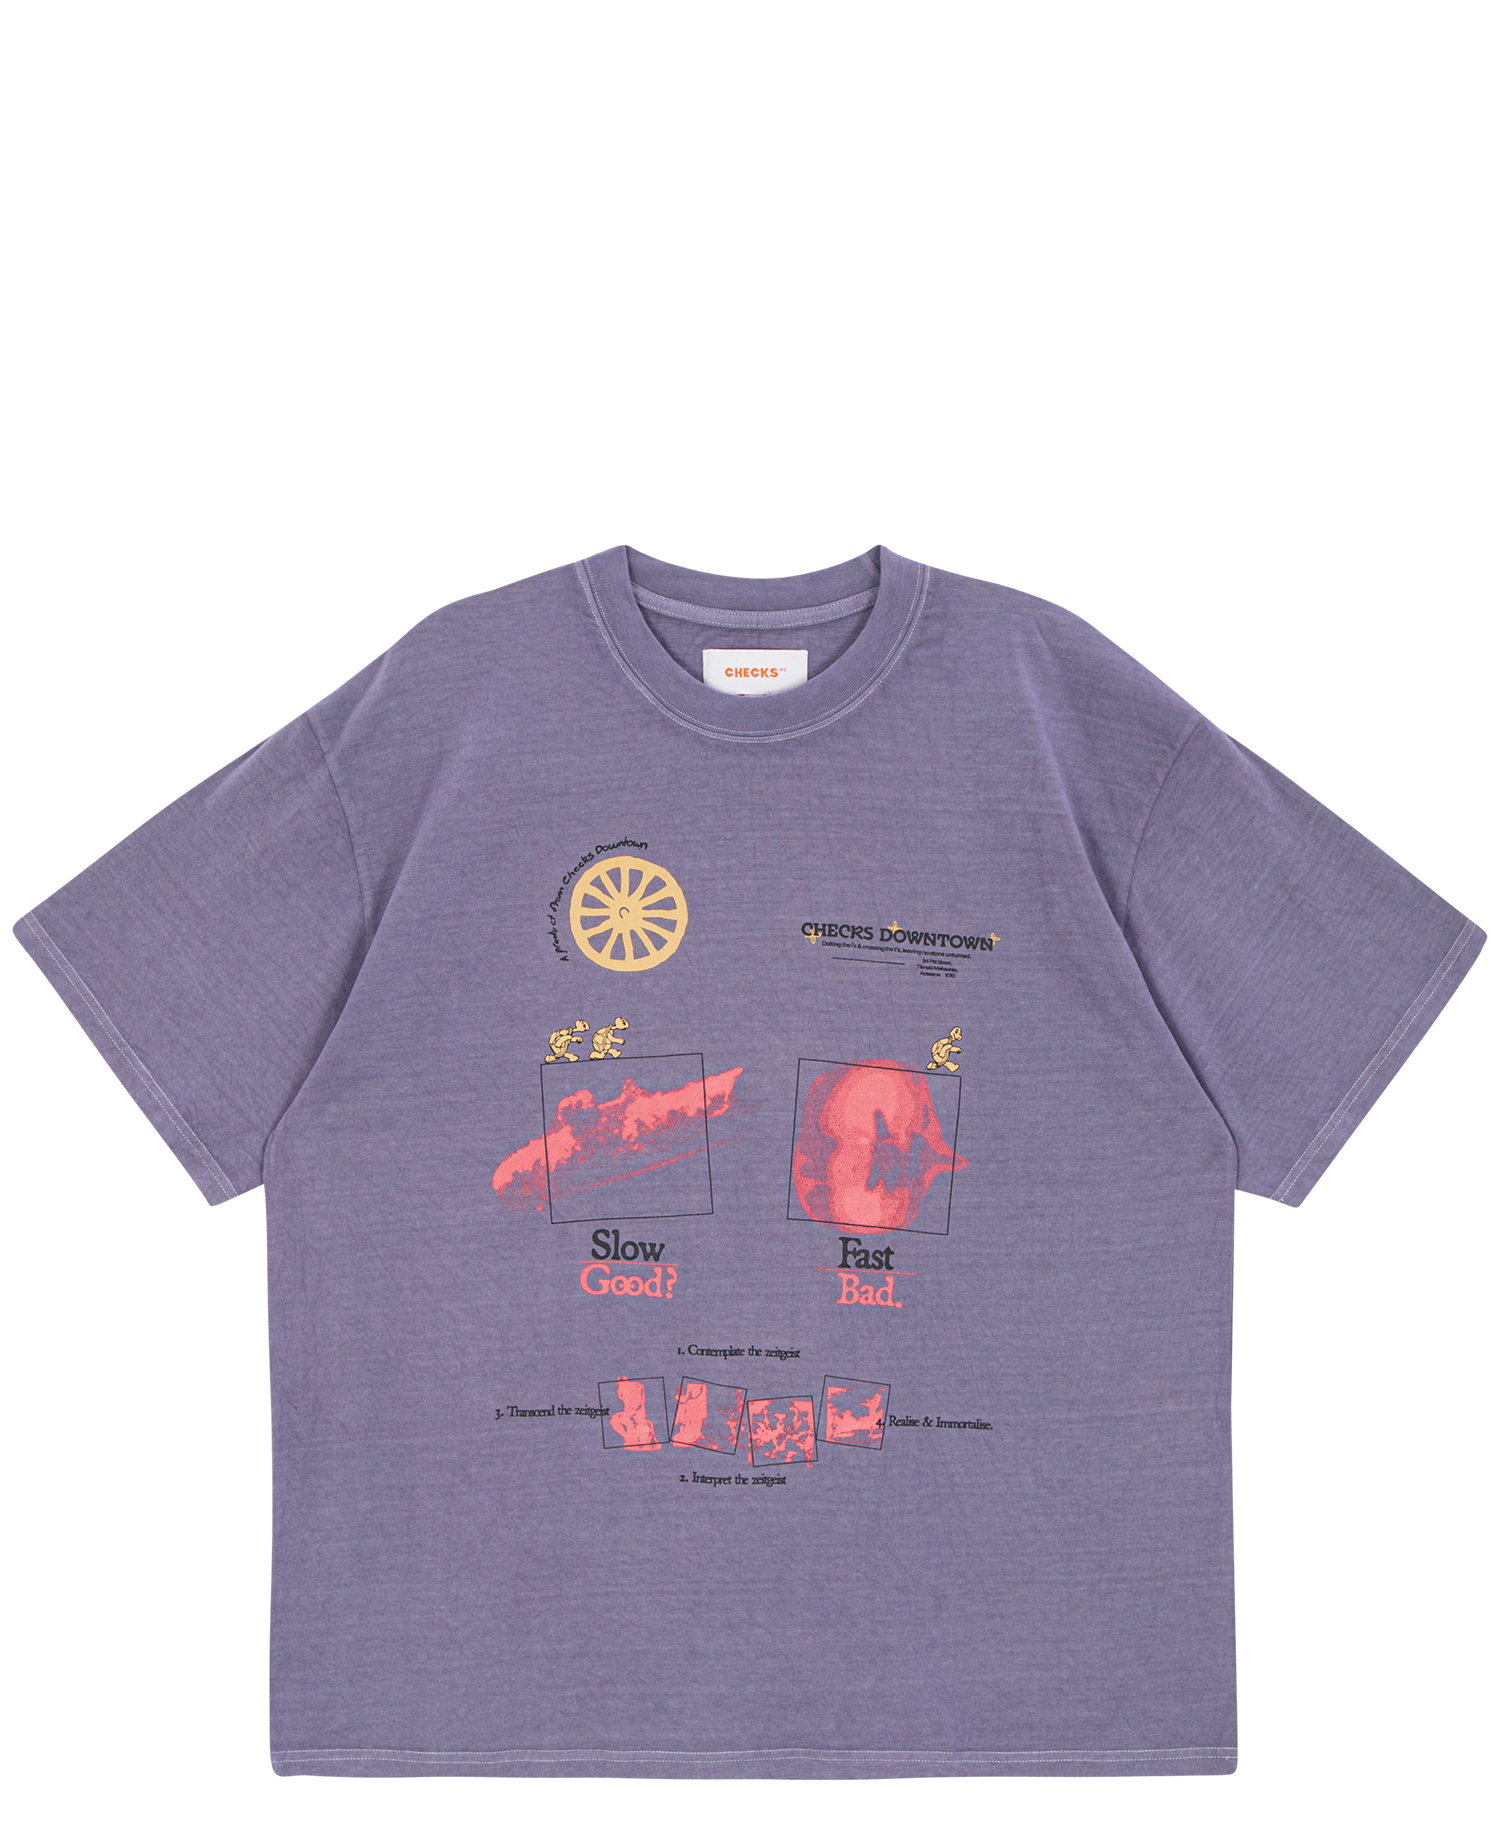 GOOD CLOTHES MADE SLOW T-SHIRT_PURPLE